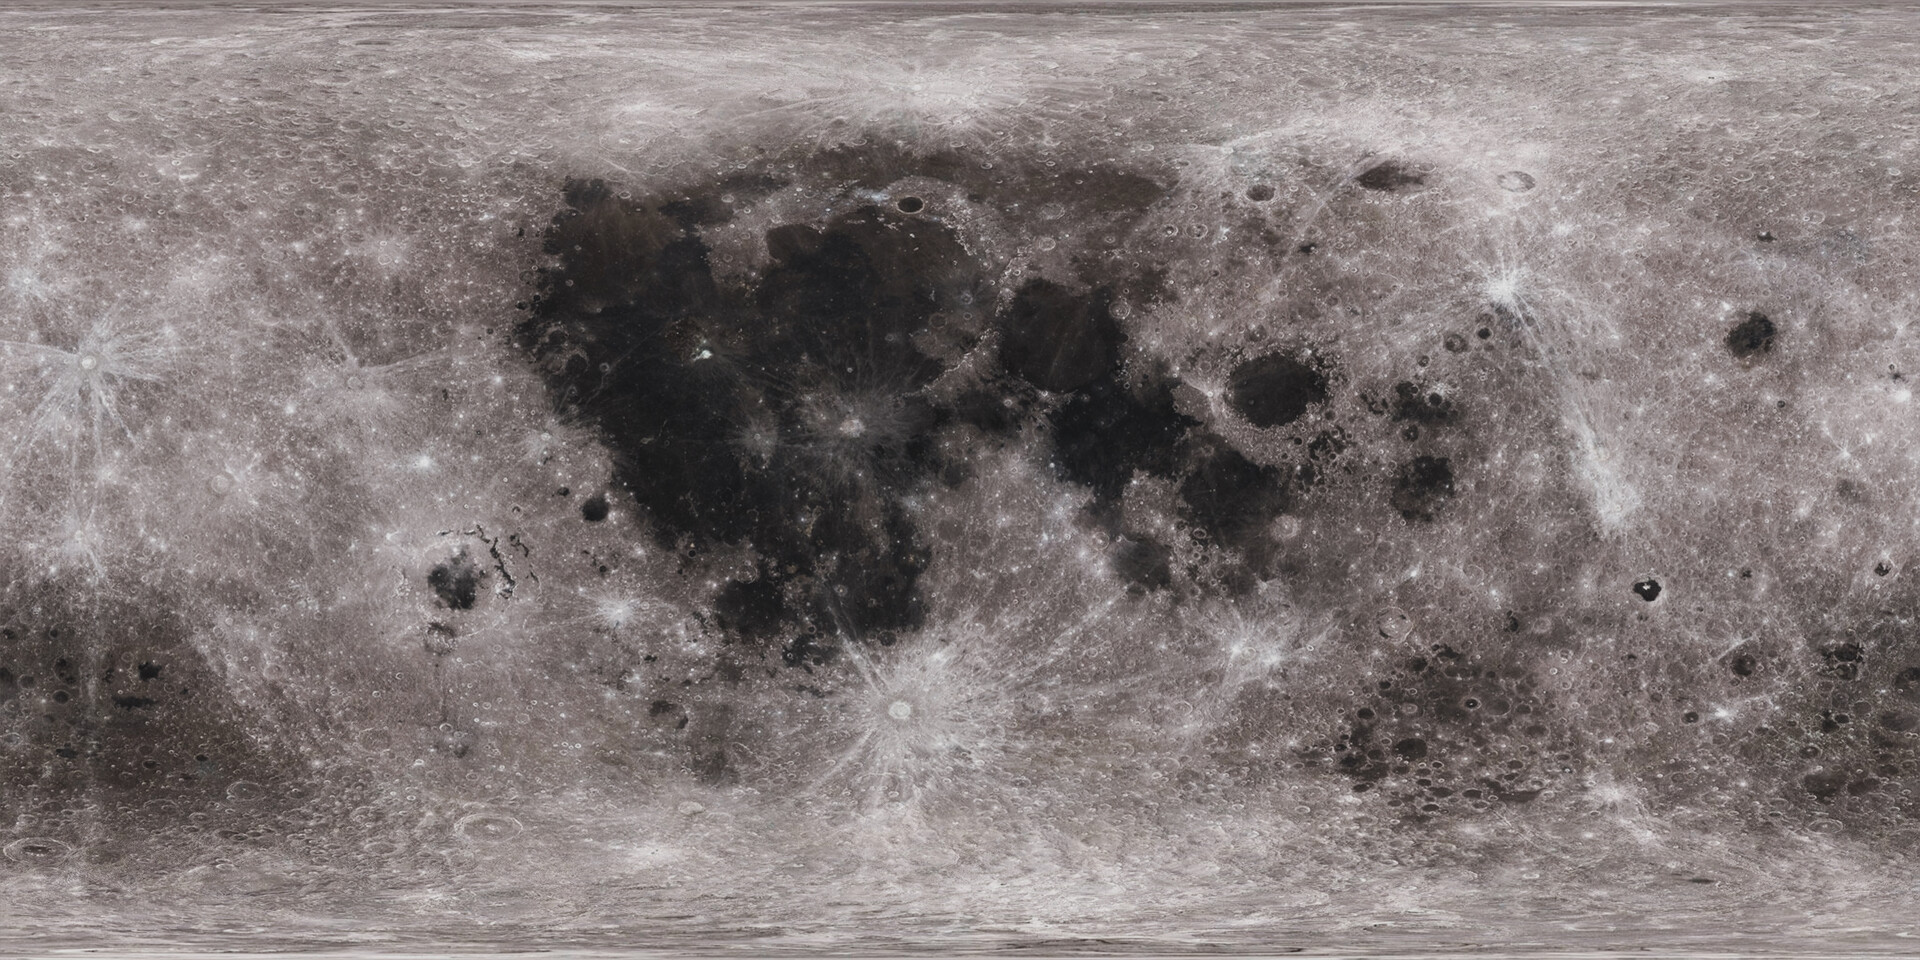 large moon textures